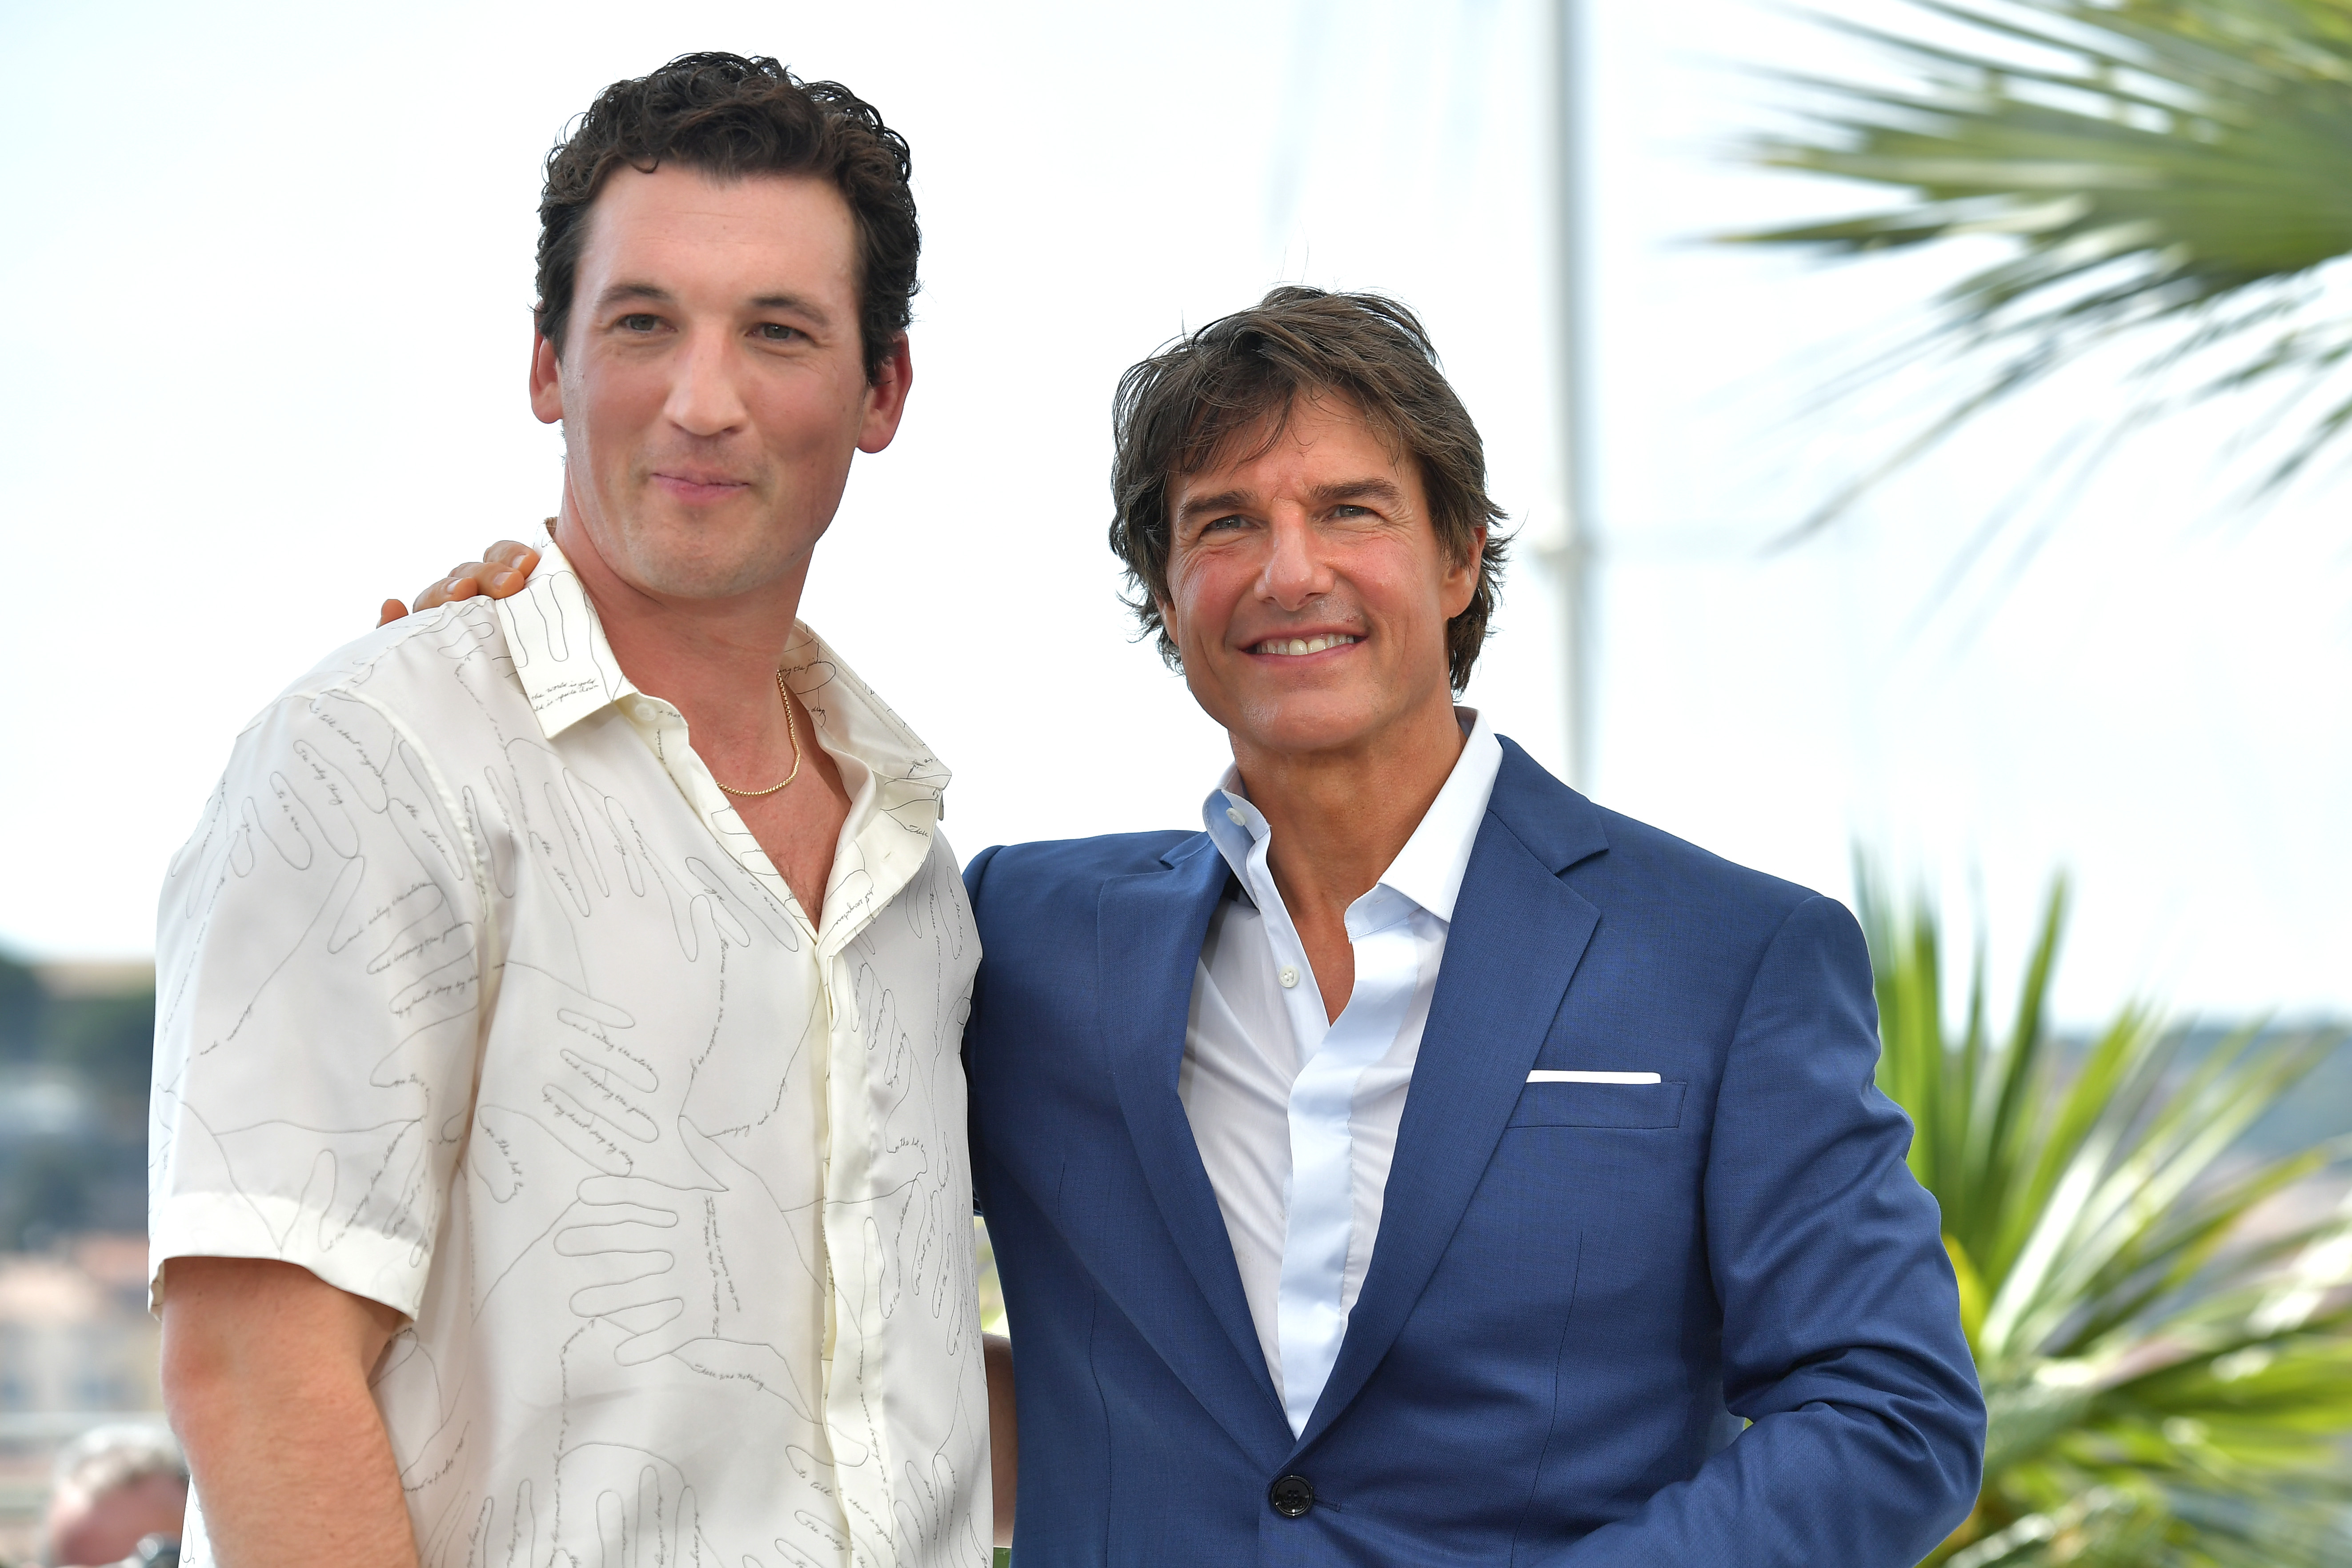 Miles Teller and Tom Cruise attend the photocall for Top Gun: Maverick at the 75th annual Cannes film festival